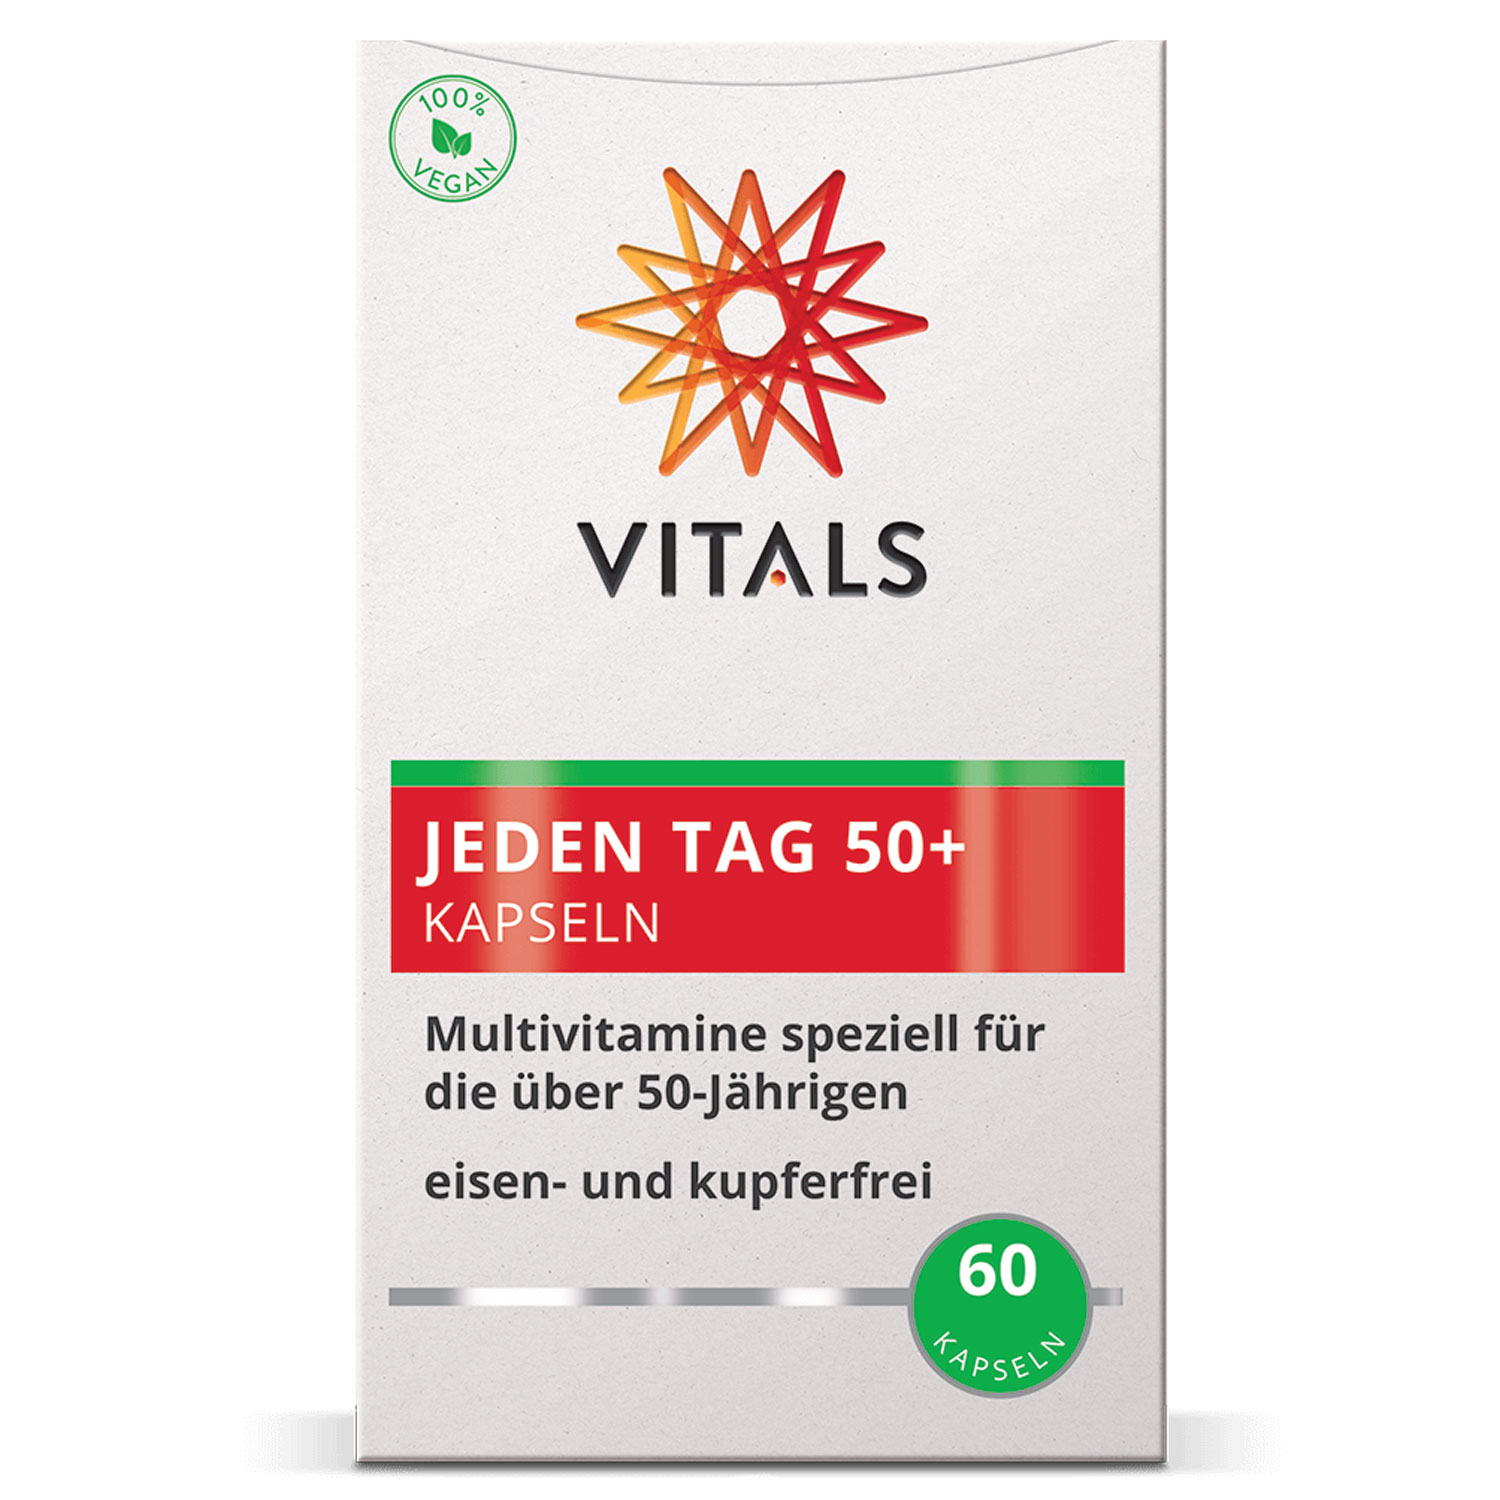 Jeden Tag 50+ Kapseln - Verpackung